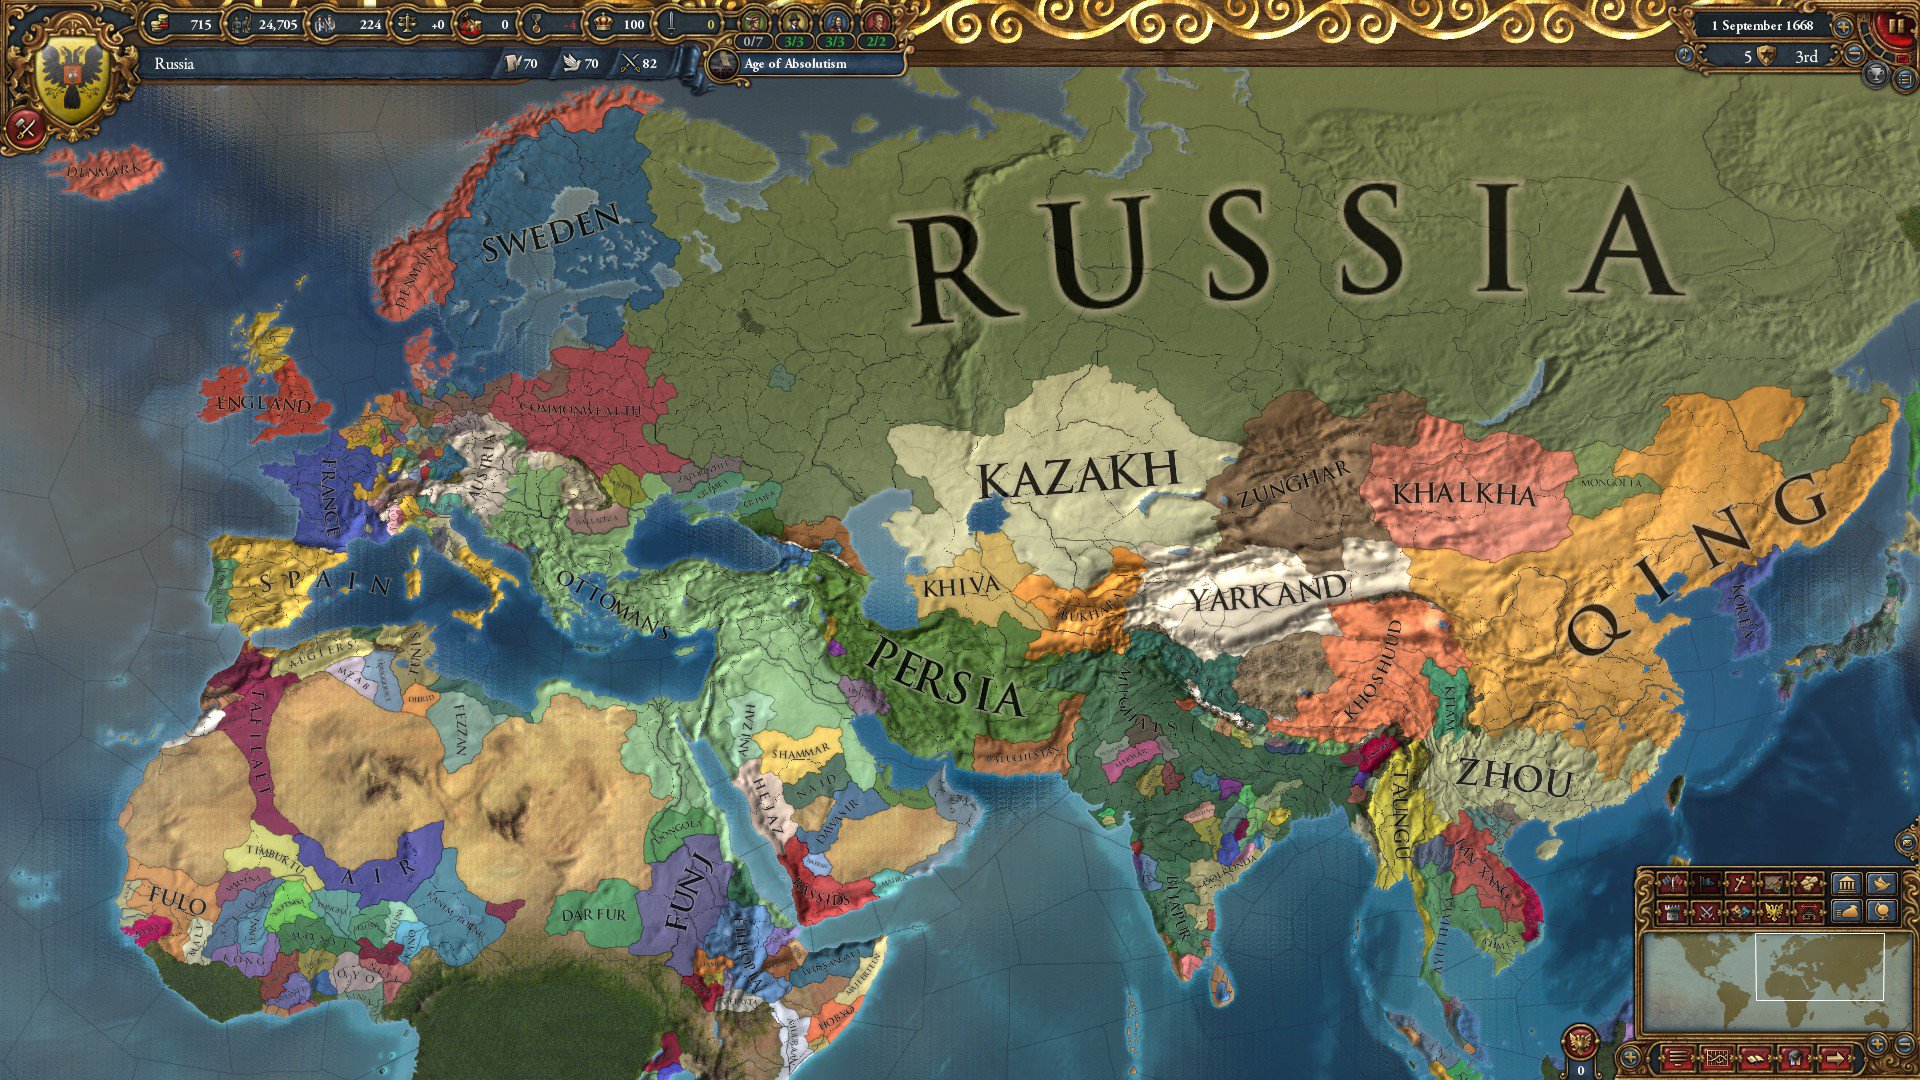 ESD Europa Universalis IV Empire Founder Pack 